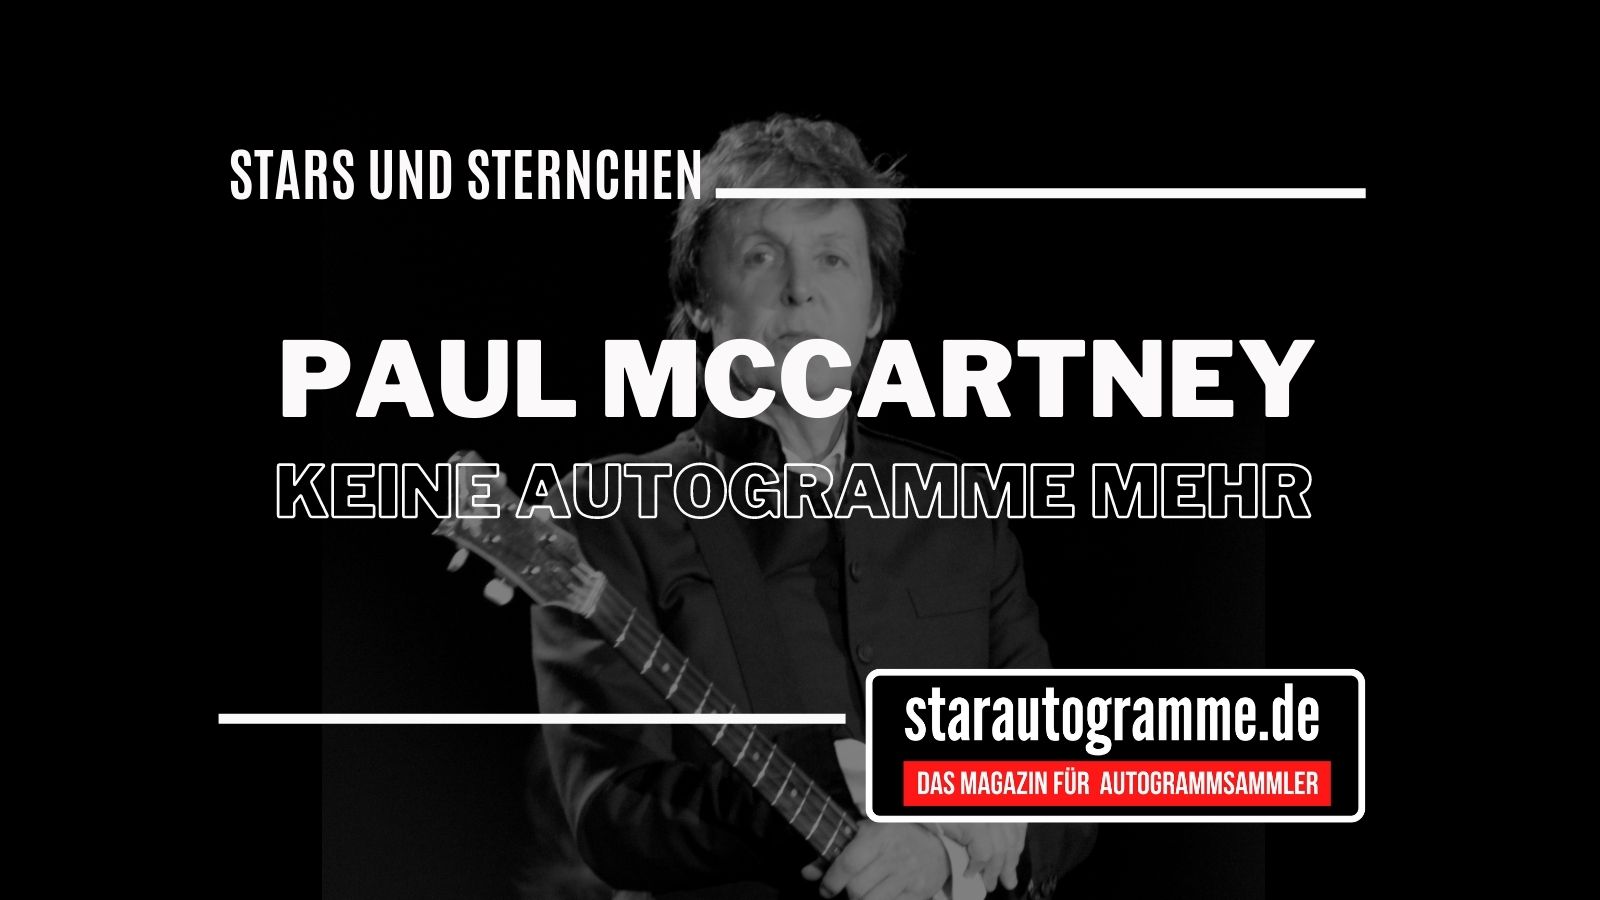 You are currently viewing Paul McCartney – Keine Autogramme mehr